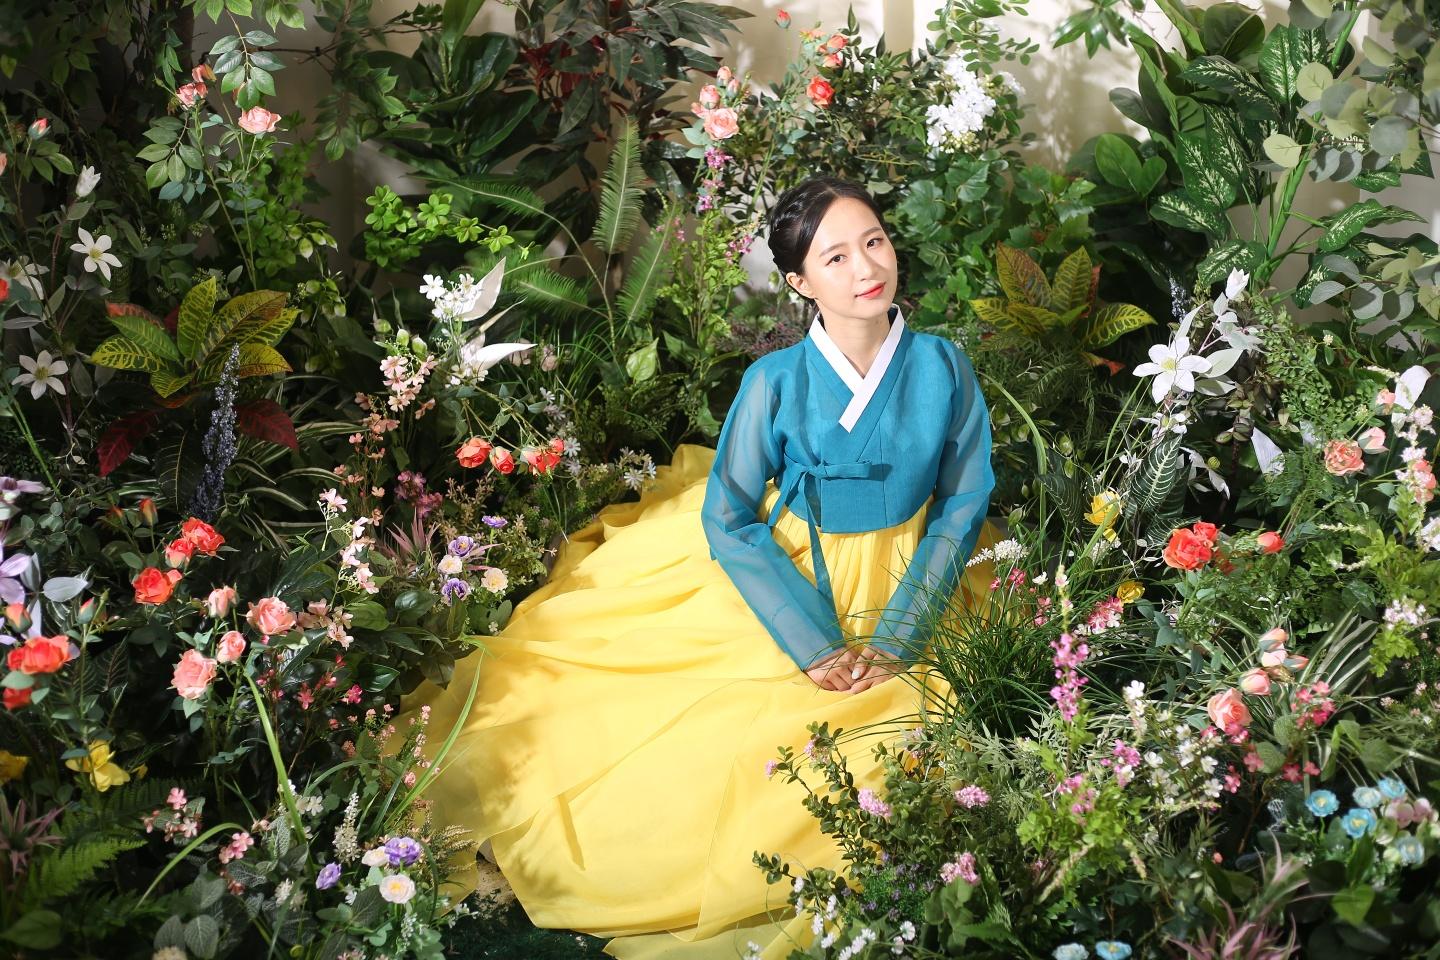 A woman wearing Hanbok stand in a lush garden surrounded by plants and flowers.